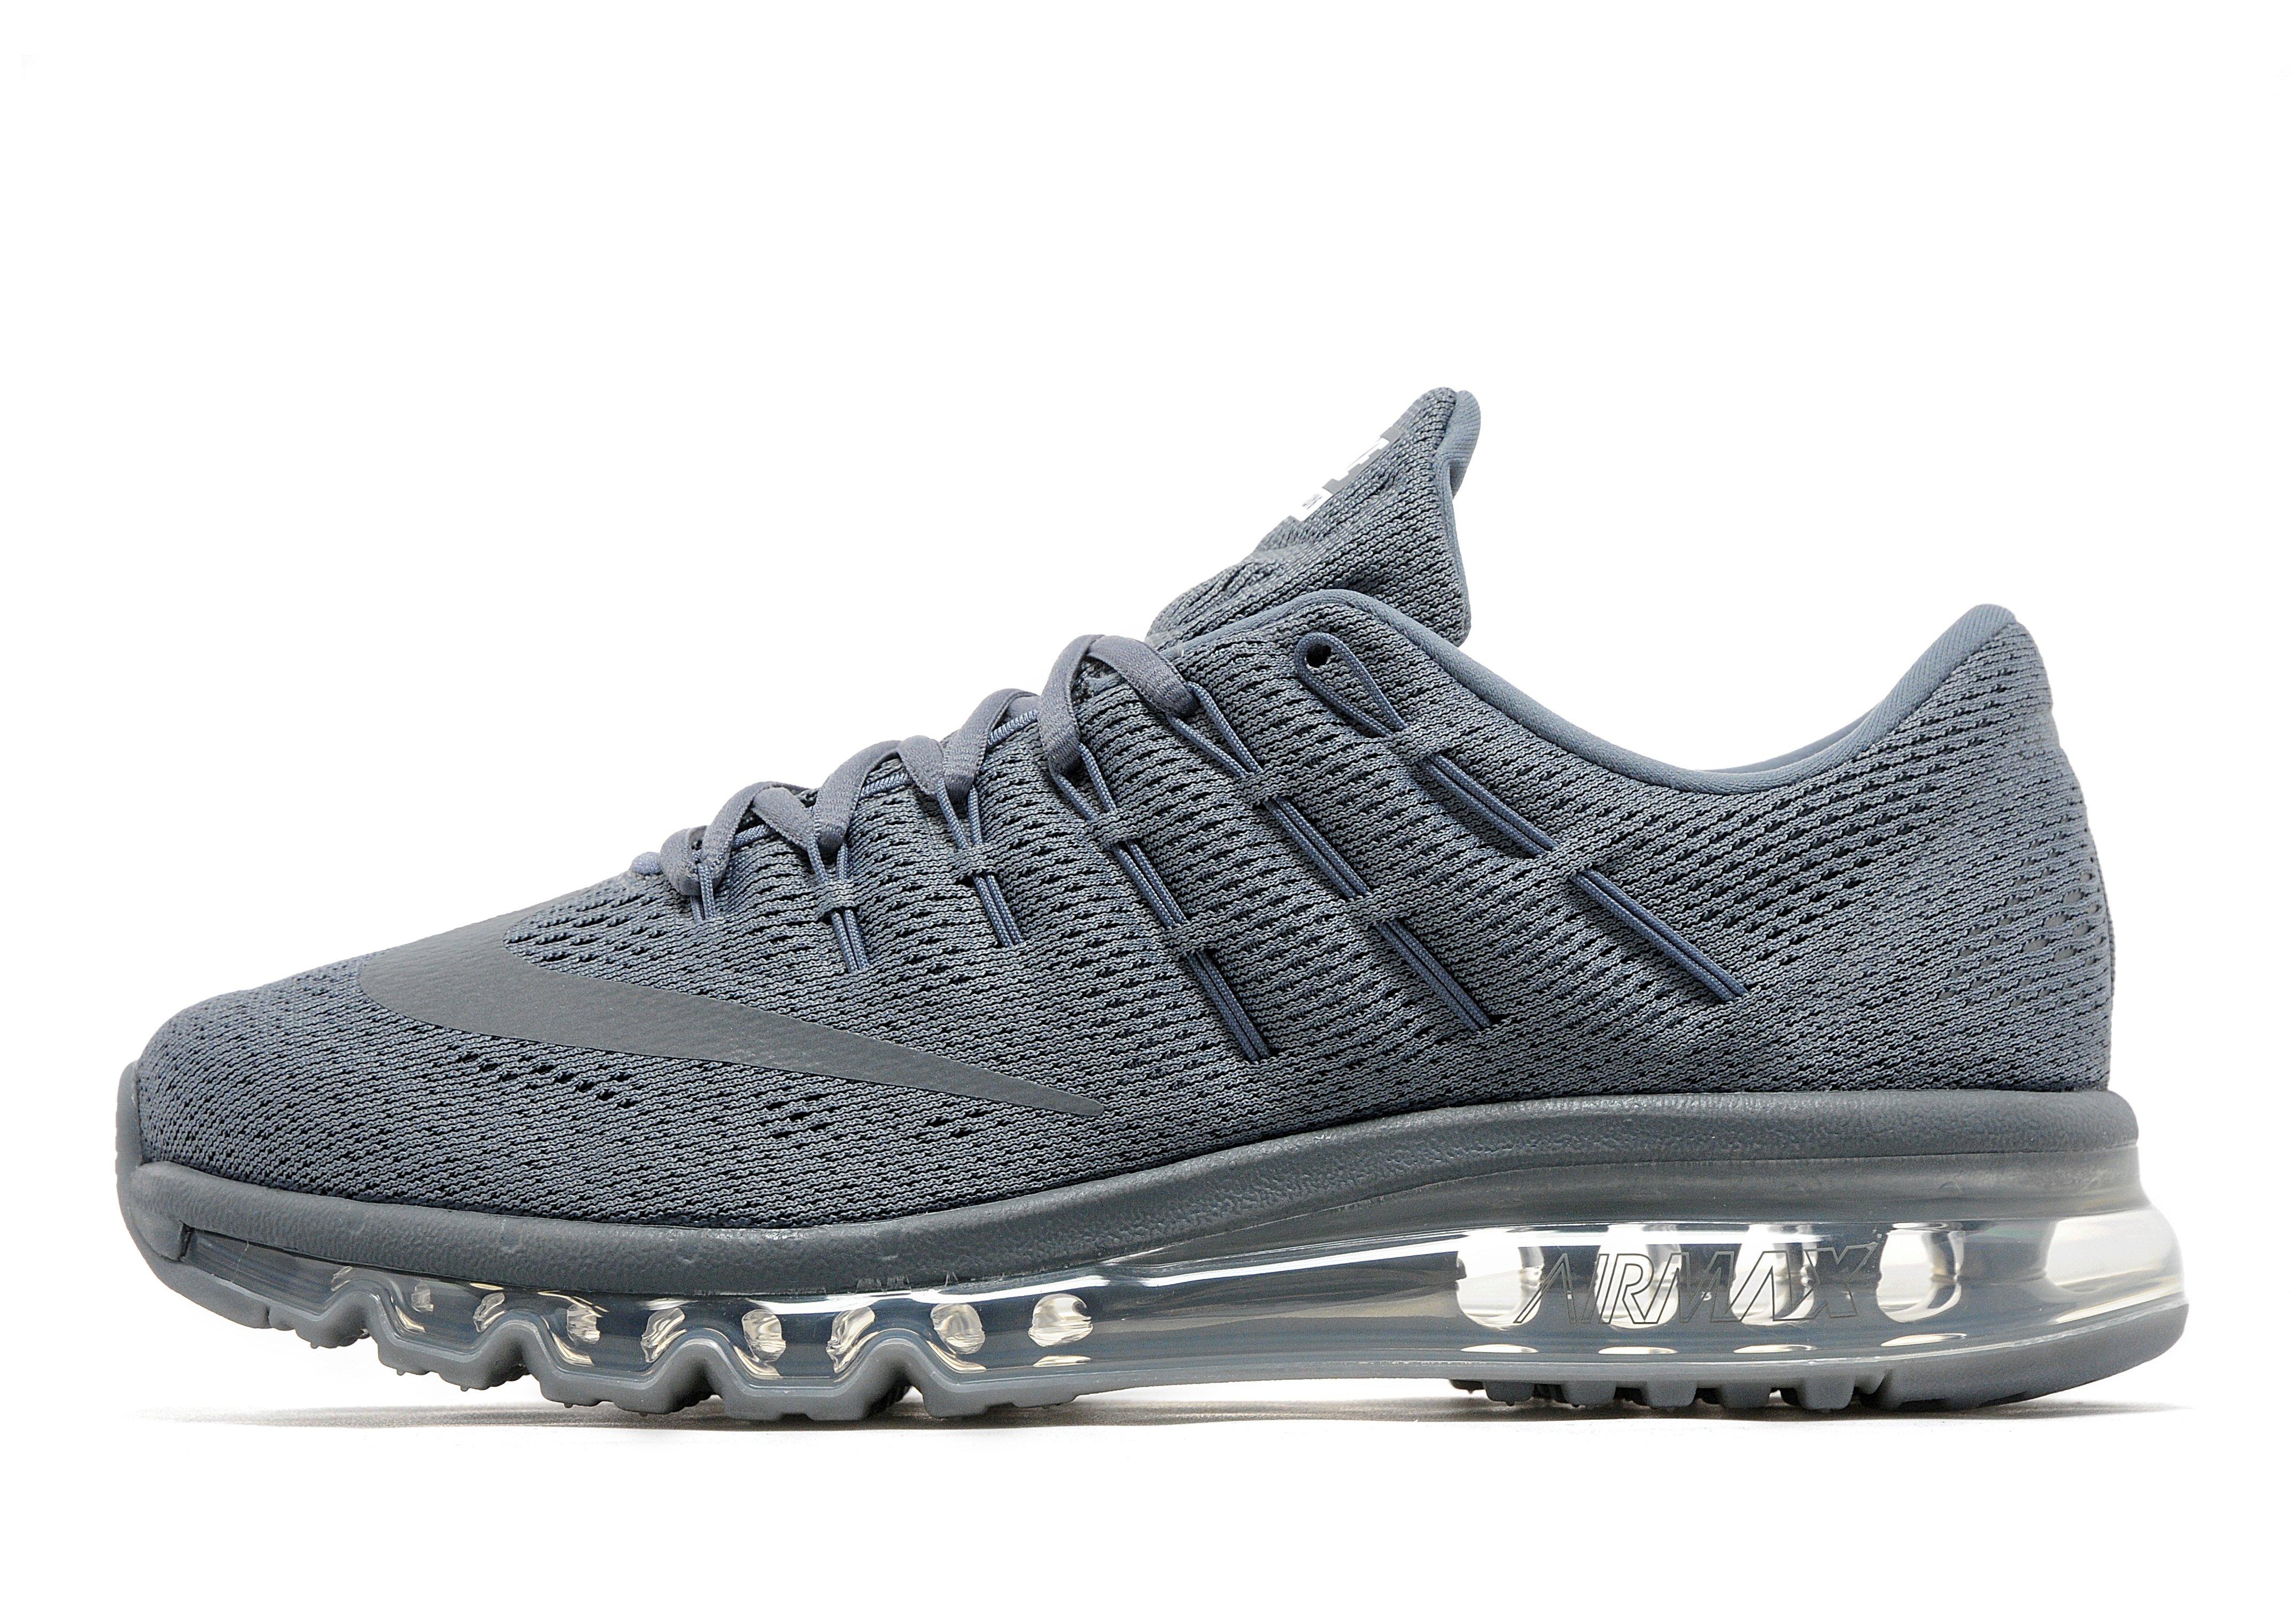 The Air Max 2016 GS Sees A Cool Grey and Hyper Pink Colorway 